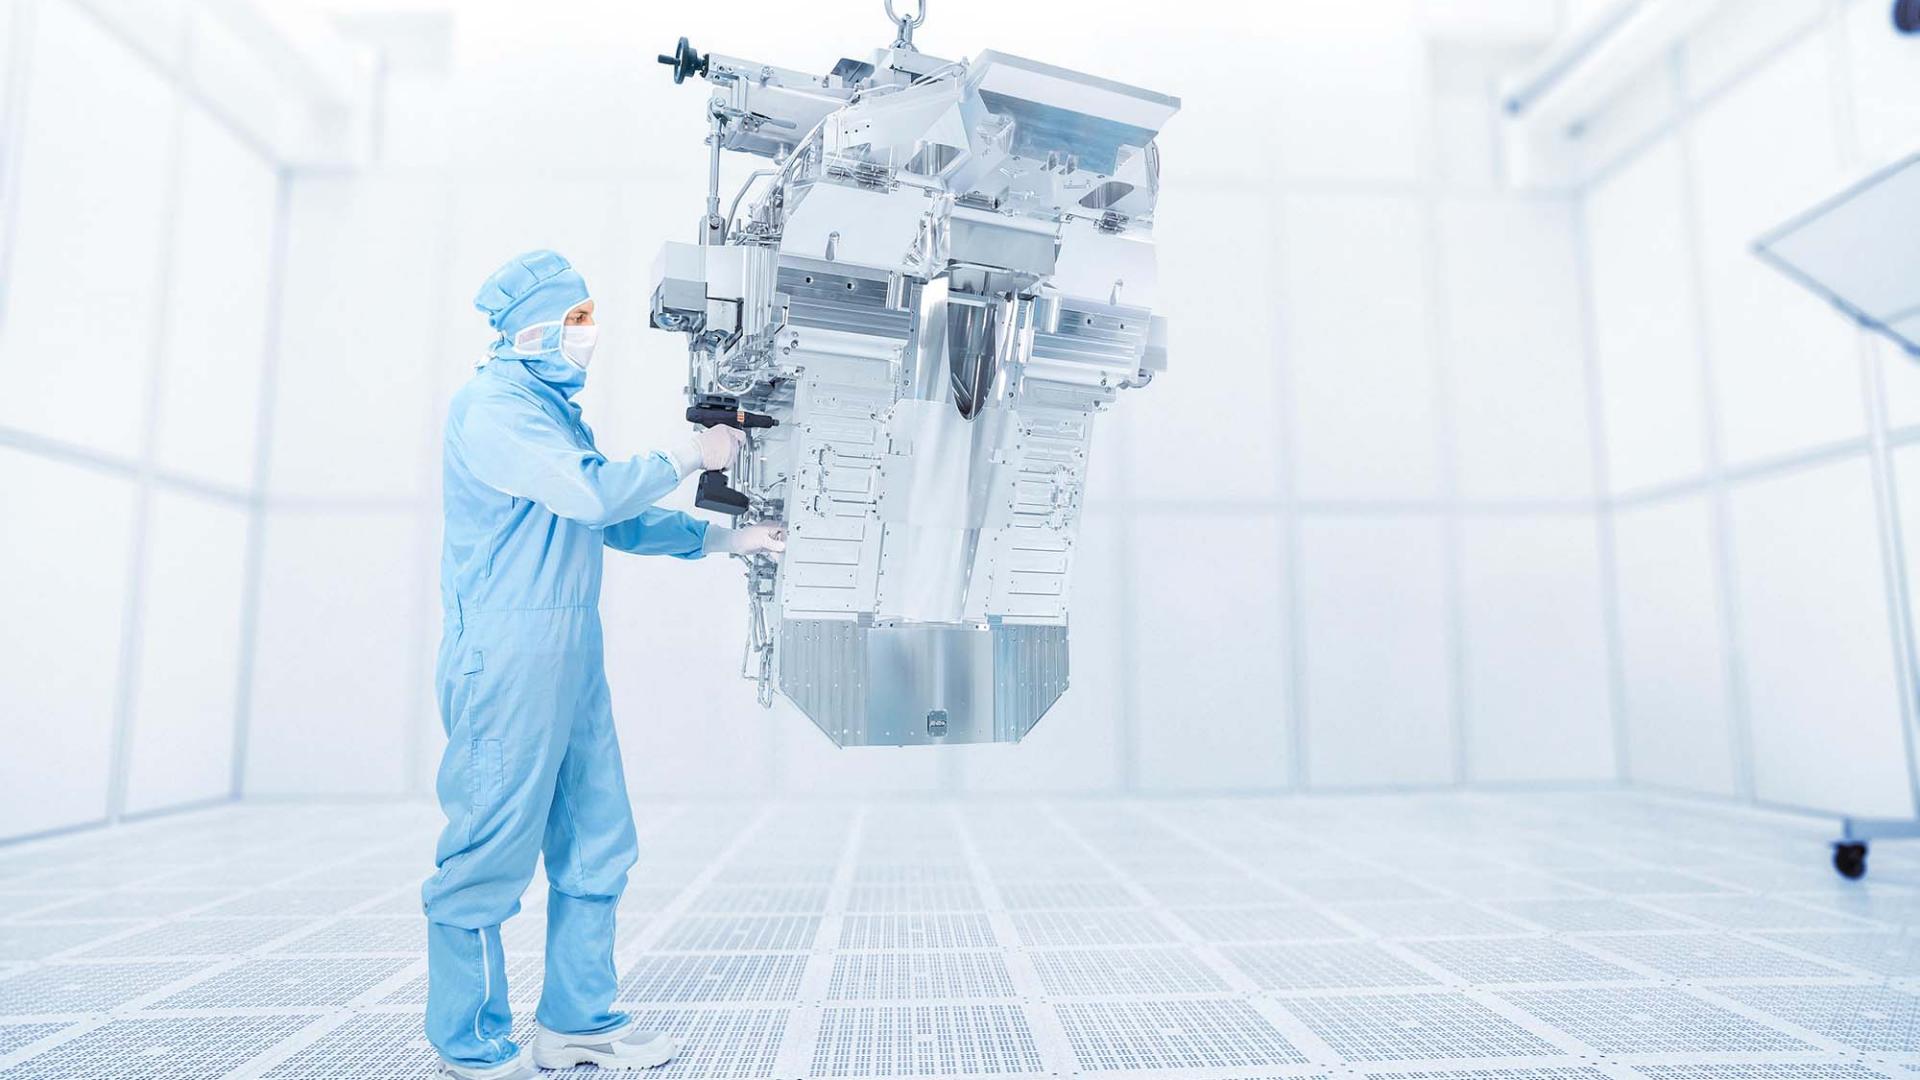 A ZEISS SMT employee works on an EUV lithogaphy in the clean room